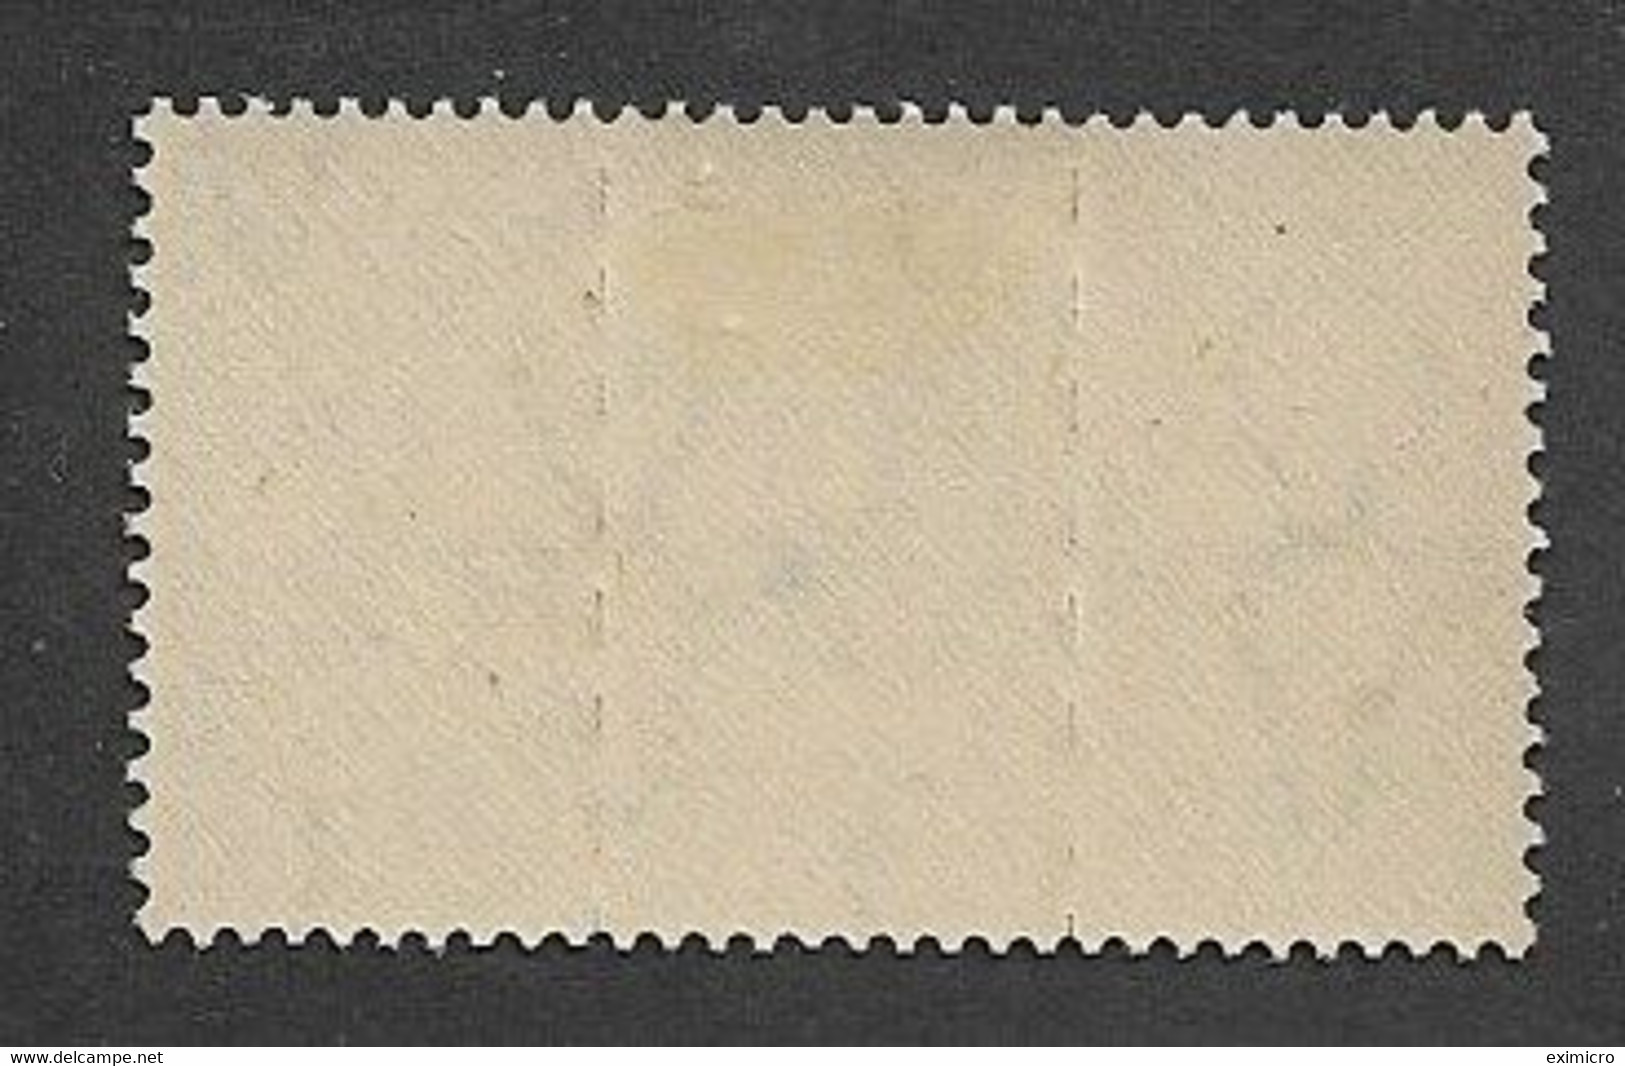 SOUTH AFRICA 1944 ½d POSTAGE DUE UNIT OF 3 SG D30 UNMOUNTED/MOUNTED MINT Cat £13 - Postage Due